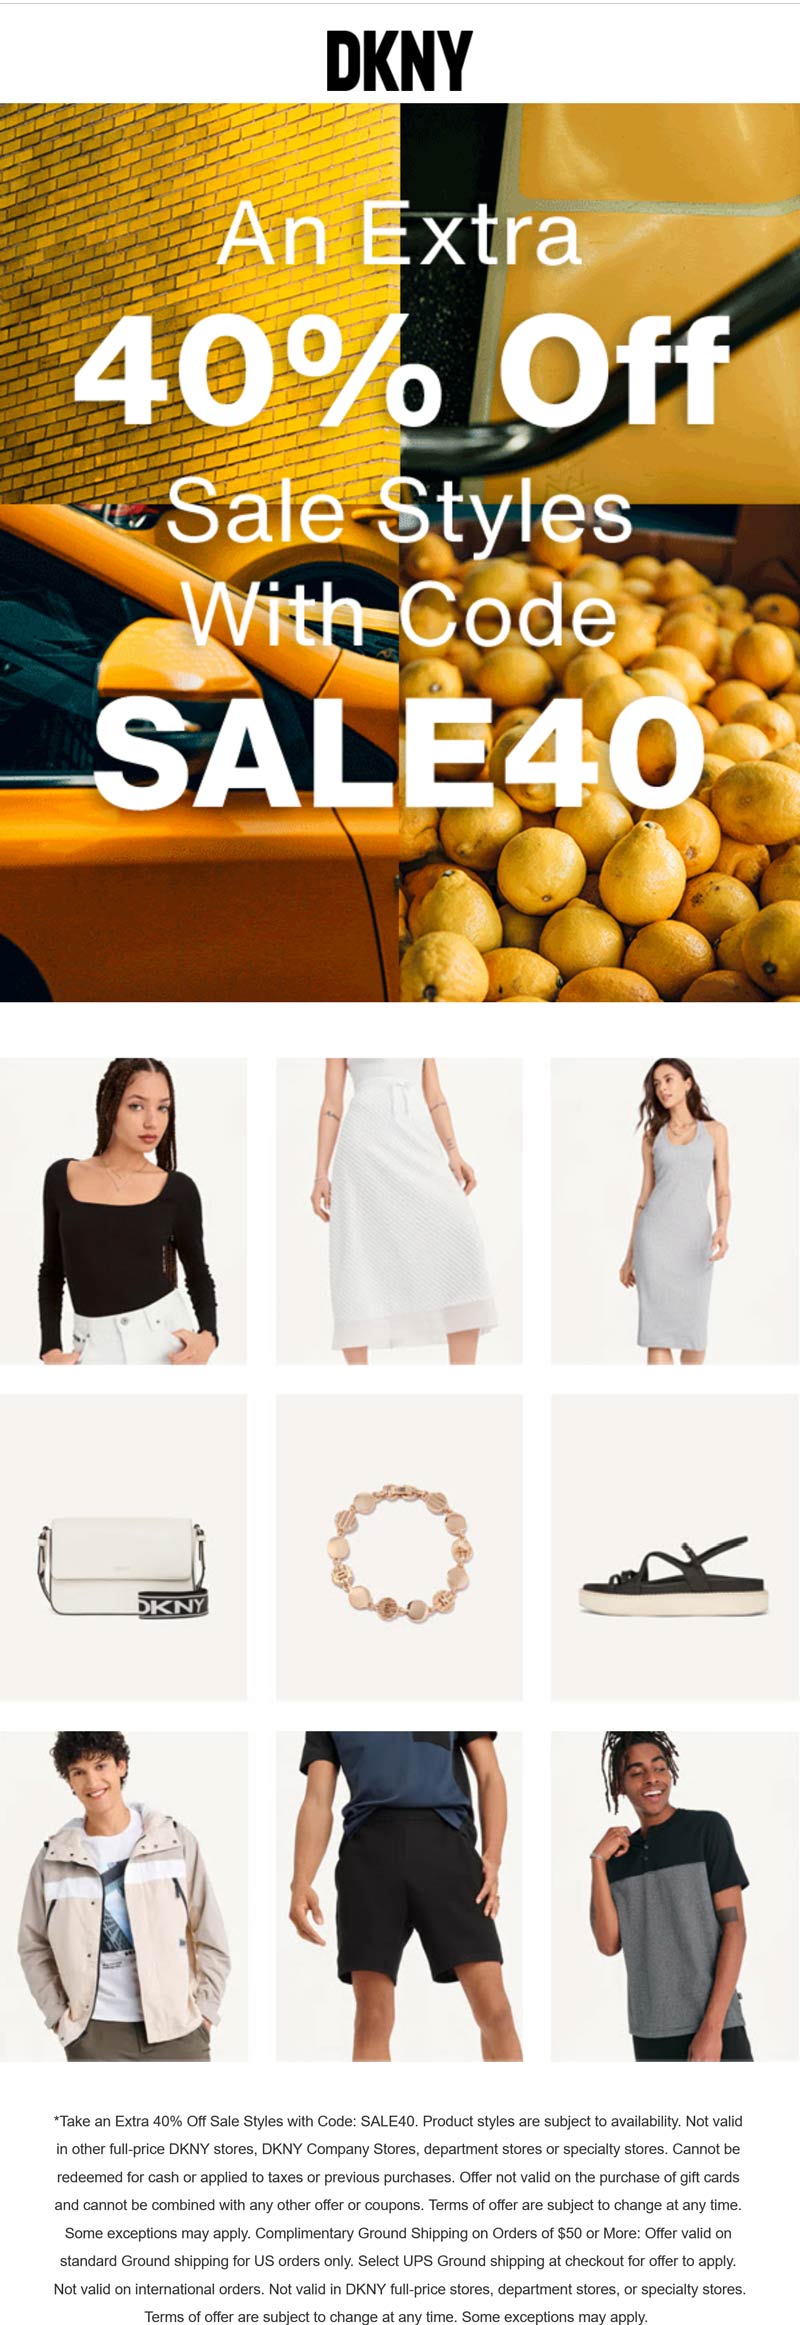 DKNY stores Coupon  Extra 40% off sale styles at DKNY via promo code SALE40 #dkny 